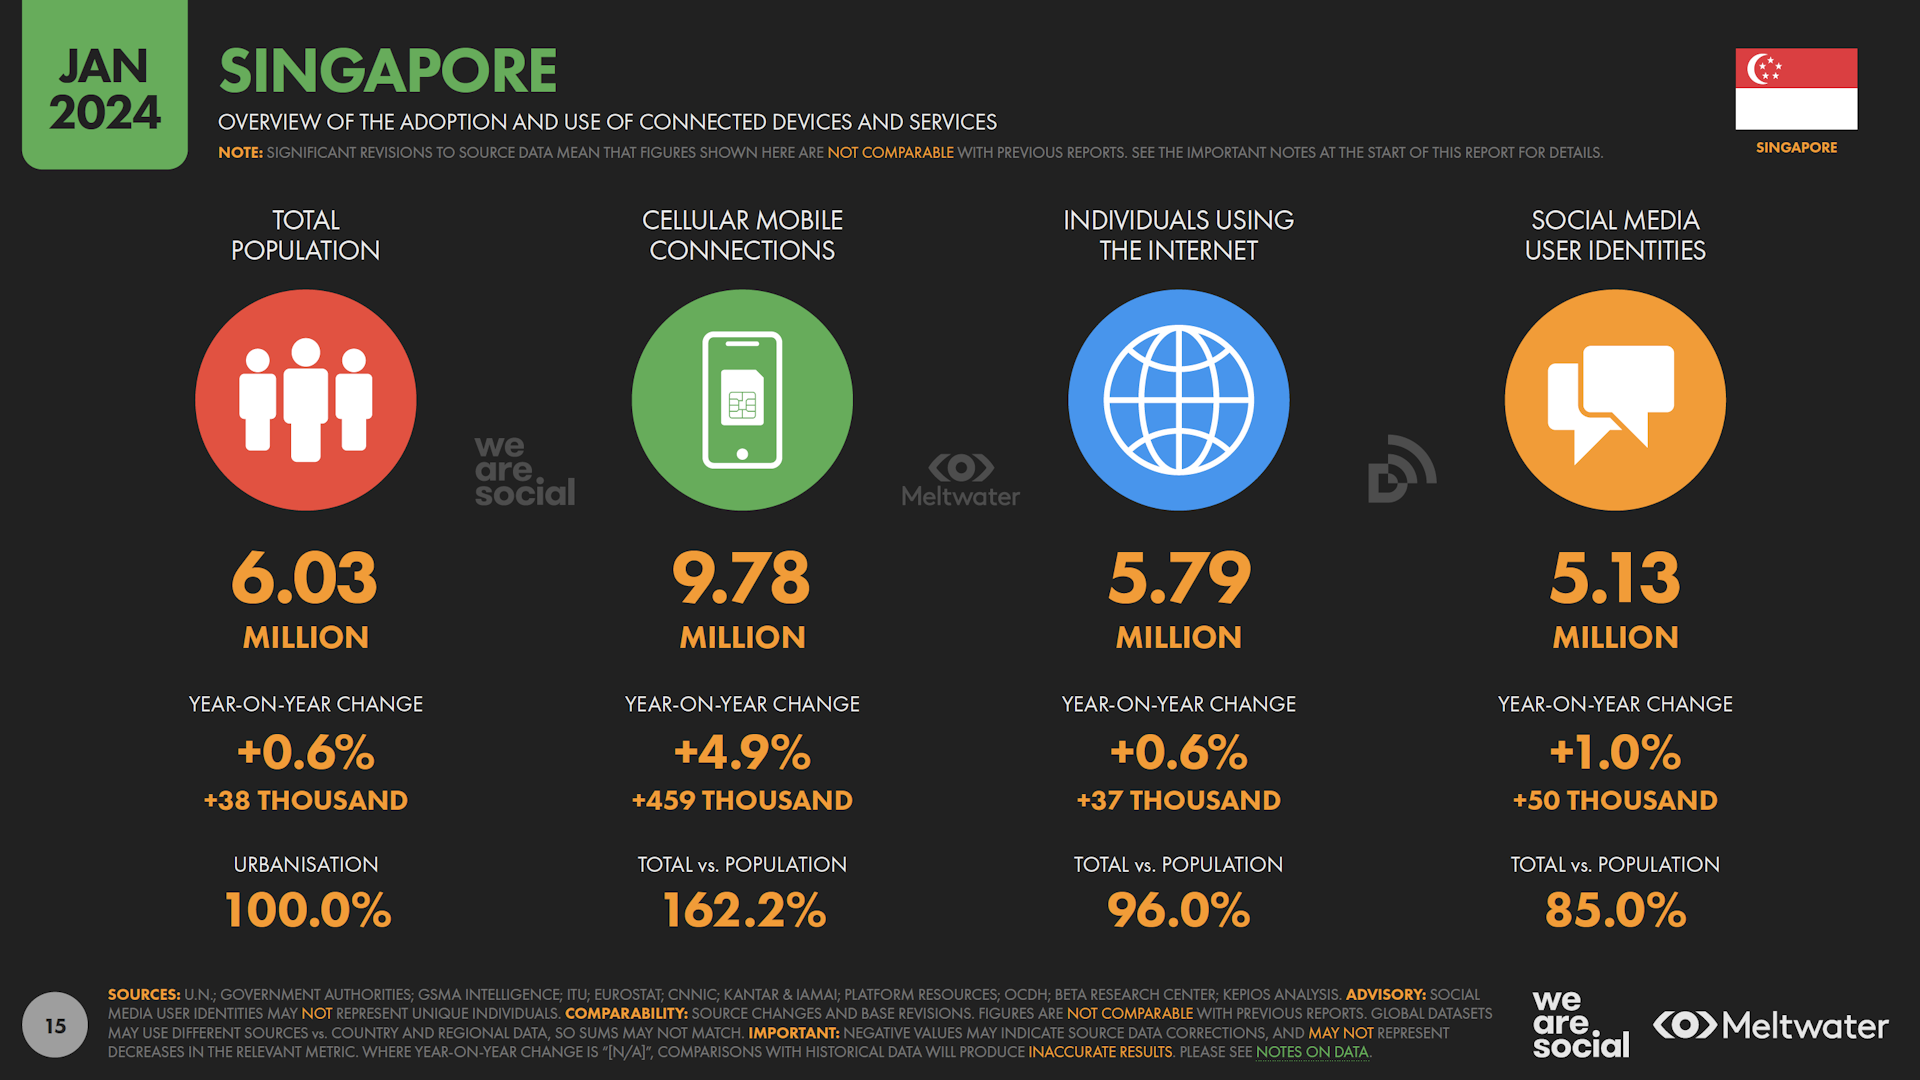 Overview of the adoption and use of connected devices and services based on Global Digital Report 2024 for Singapore